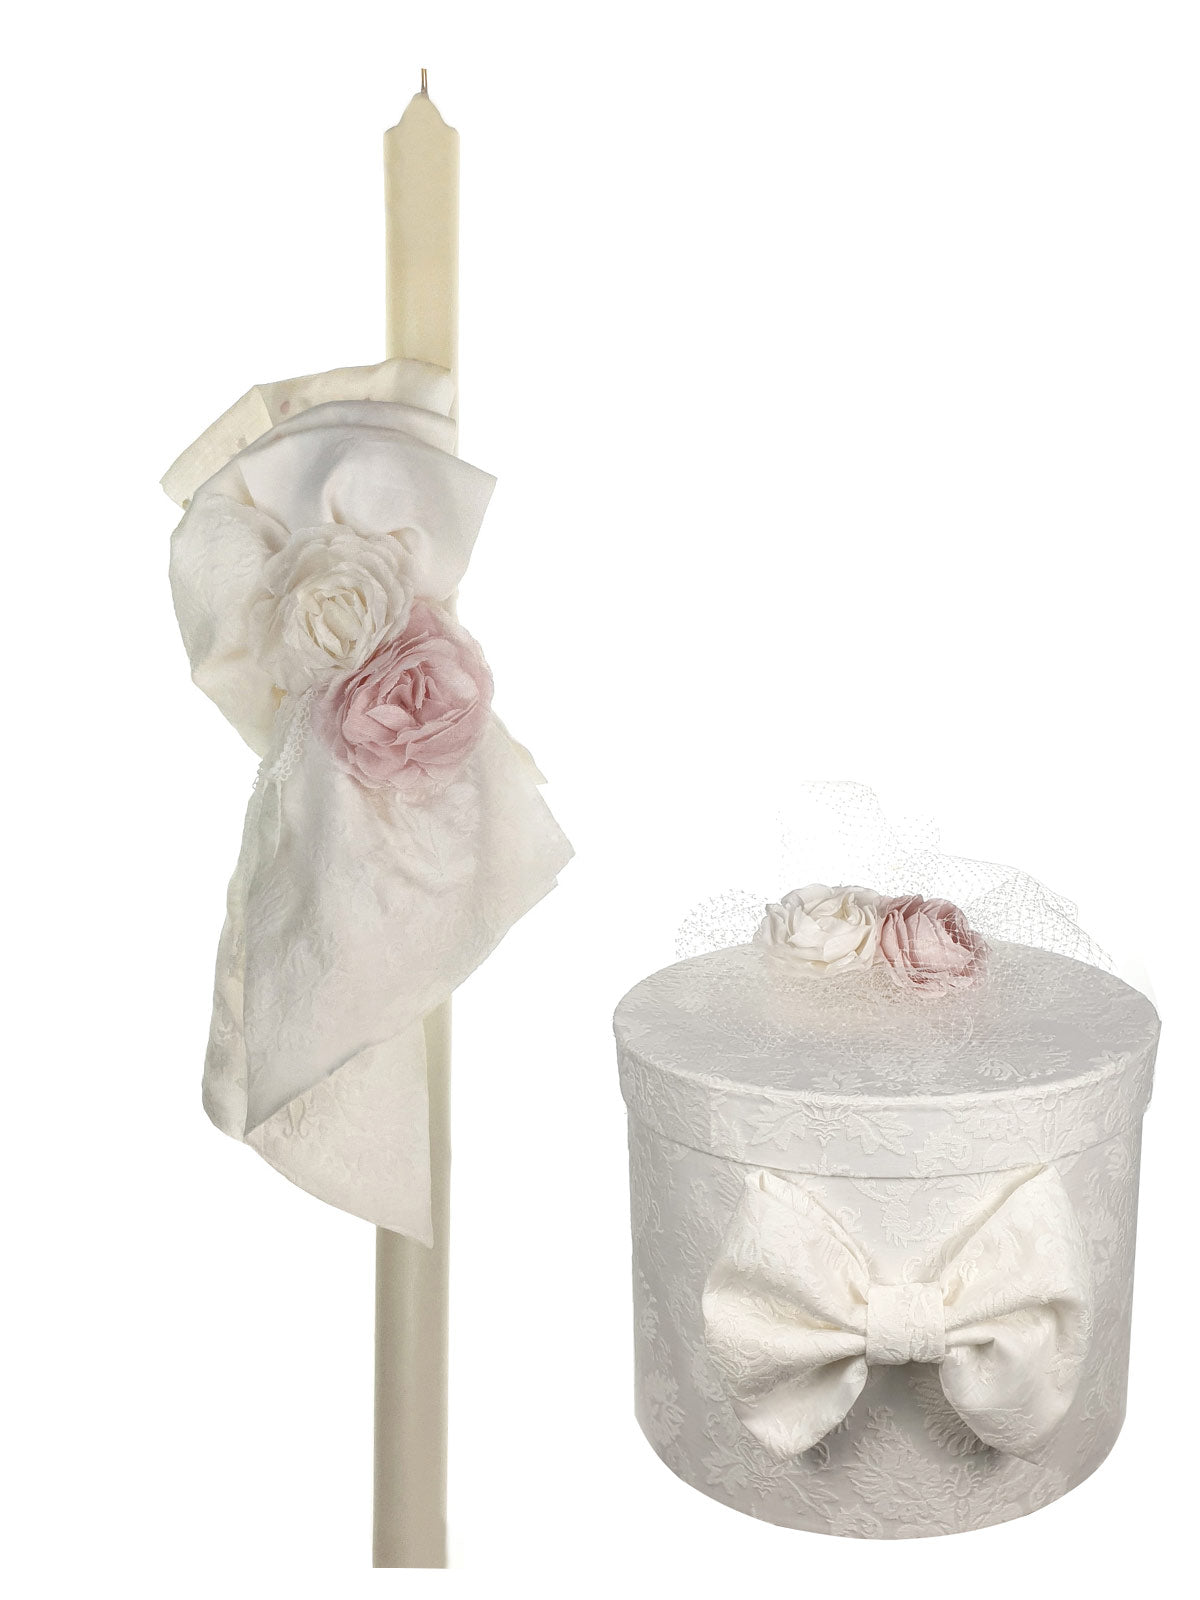 Christening candle with flowers - LOVABLE